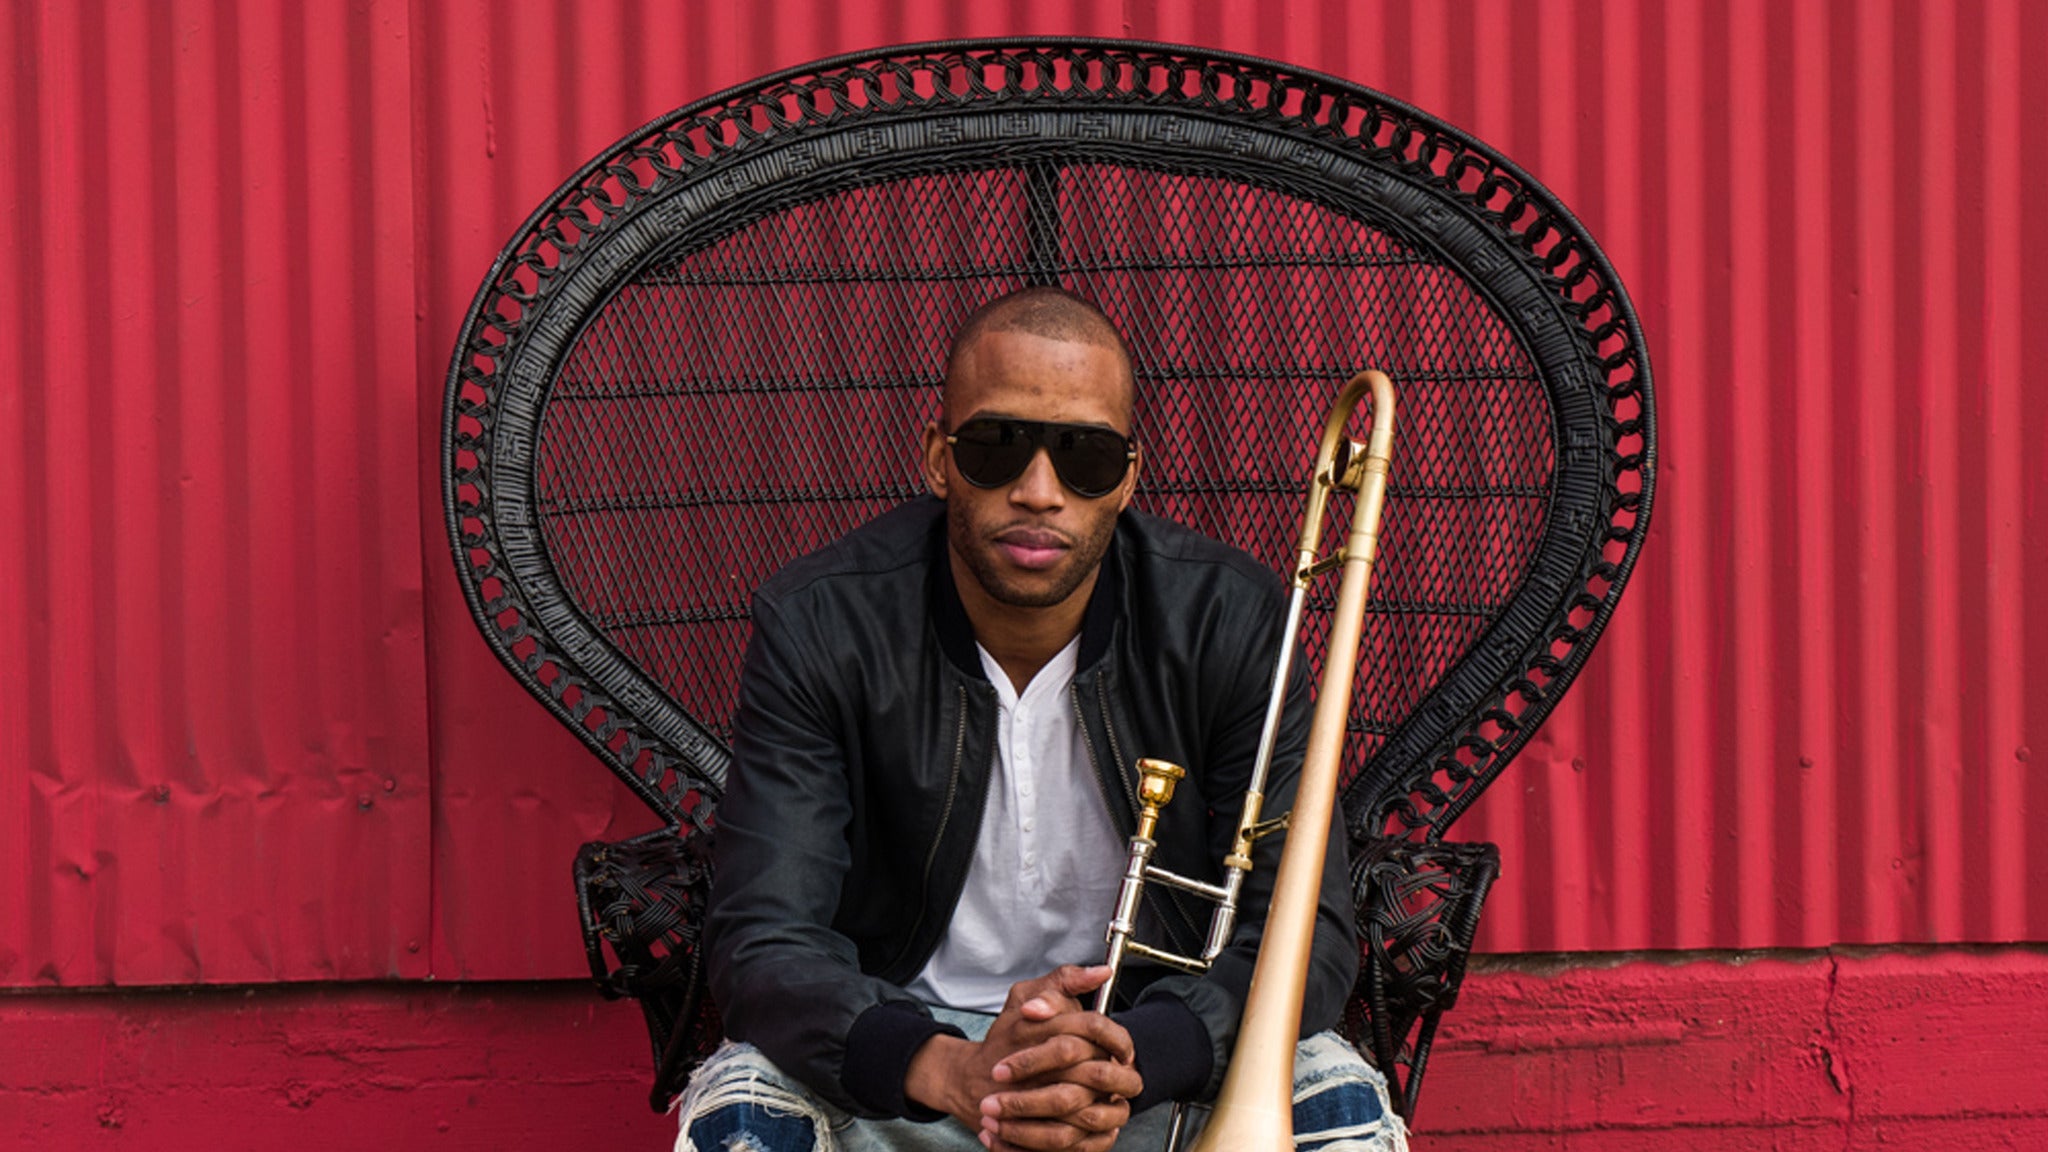 Trombone Shorty in Detroit promo photo for Exclusive presale offer code